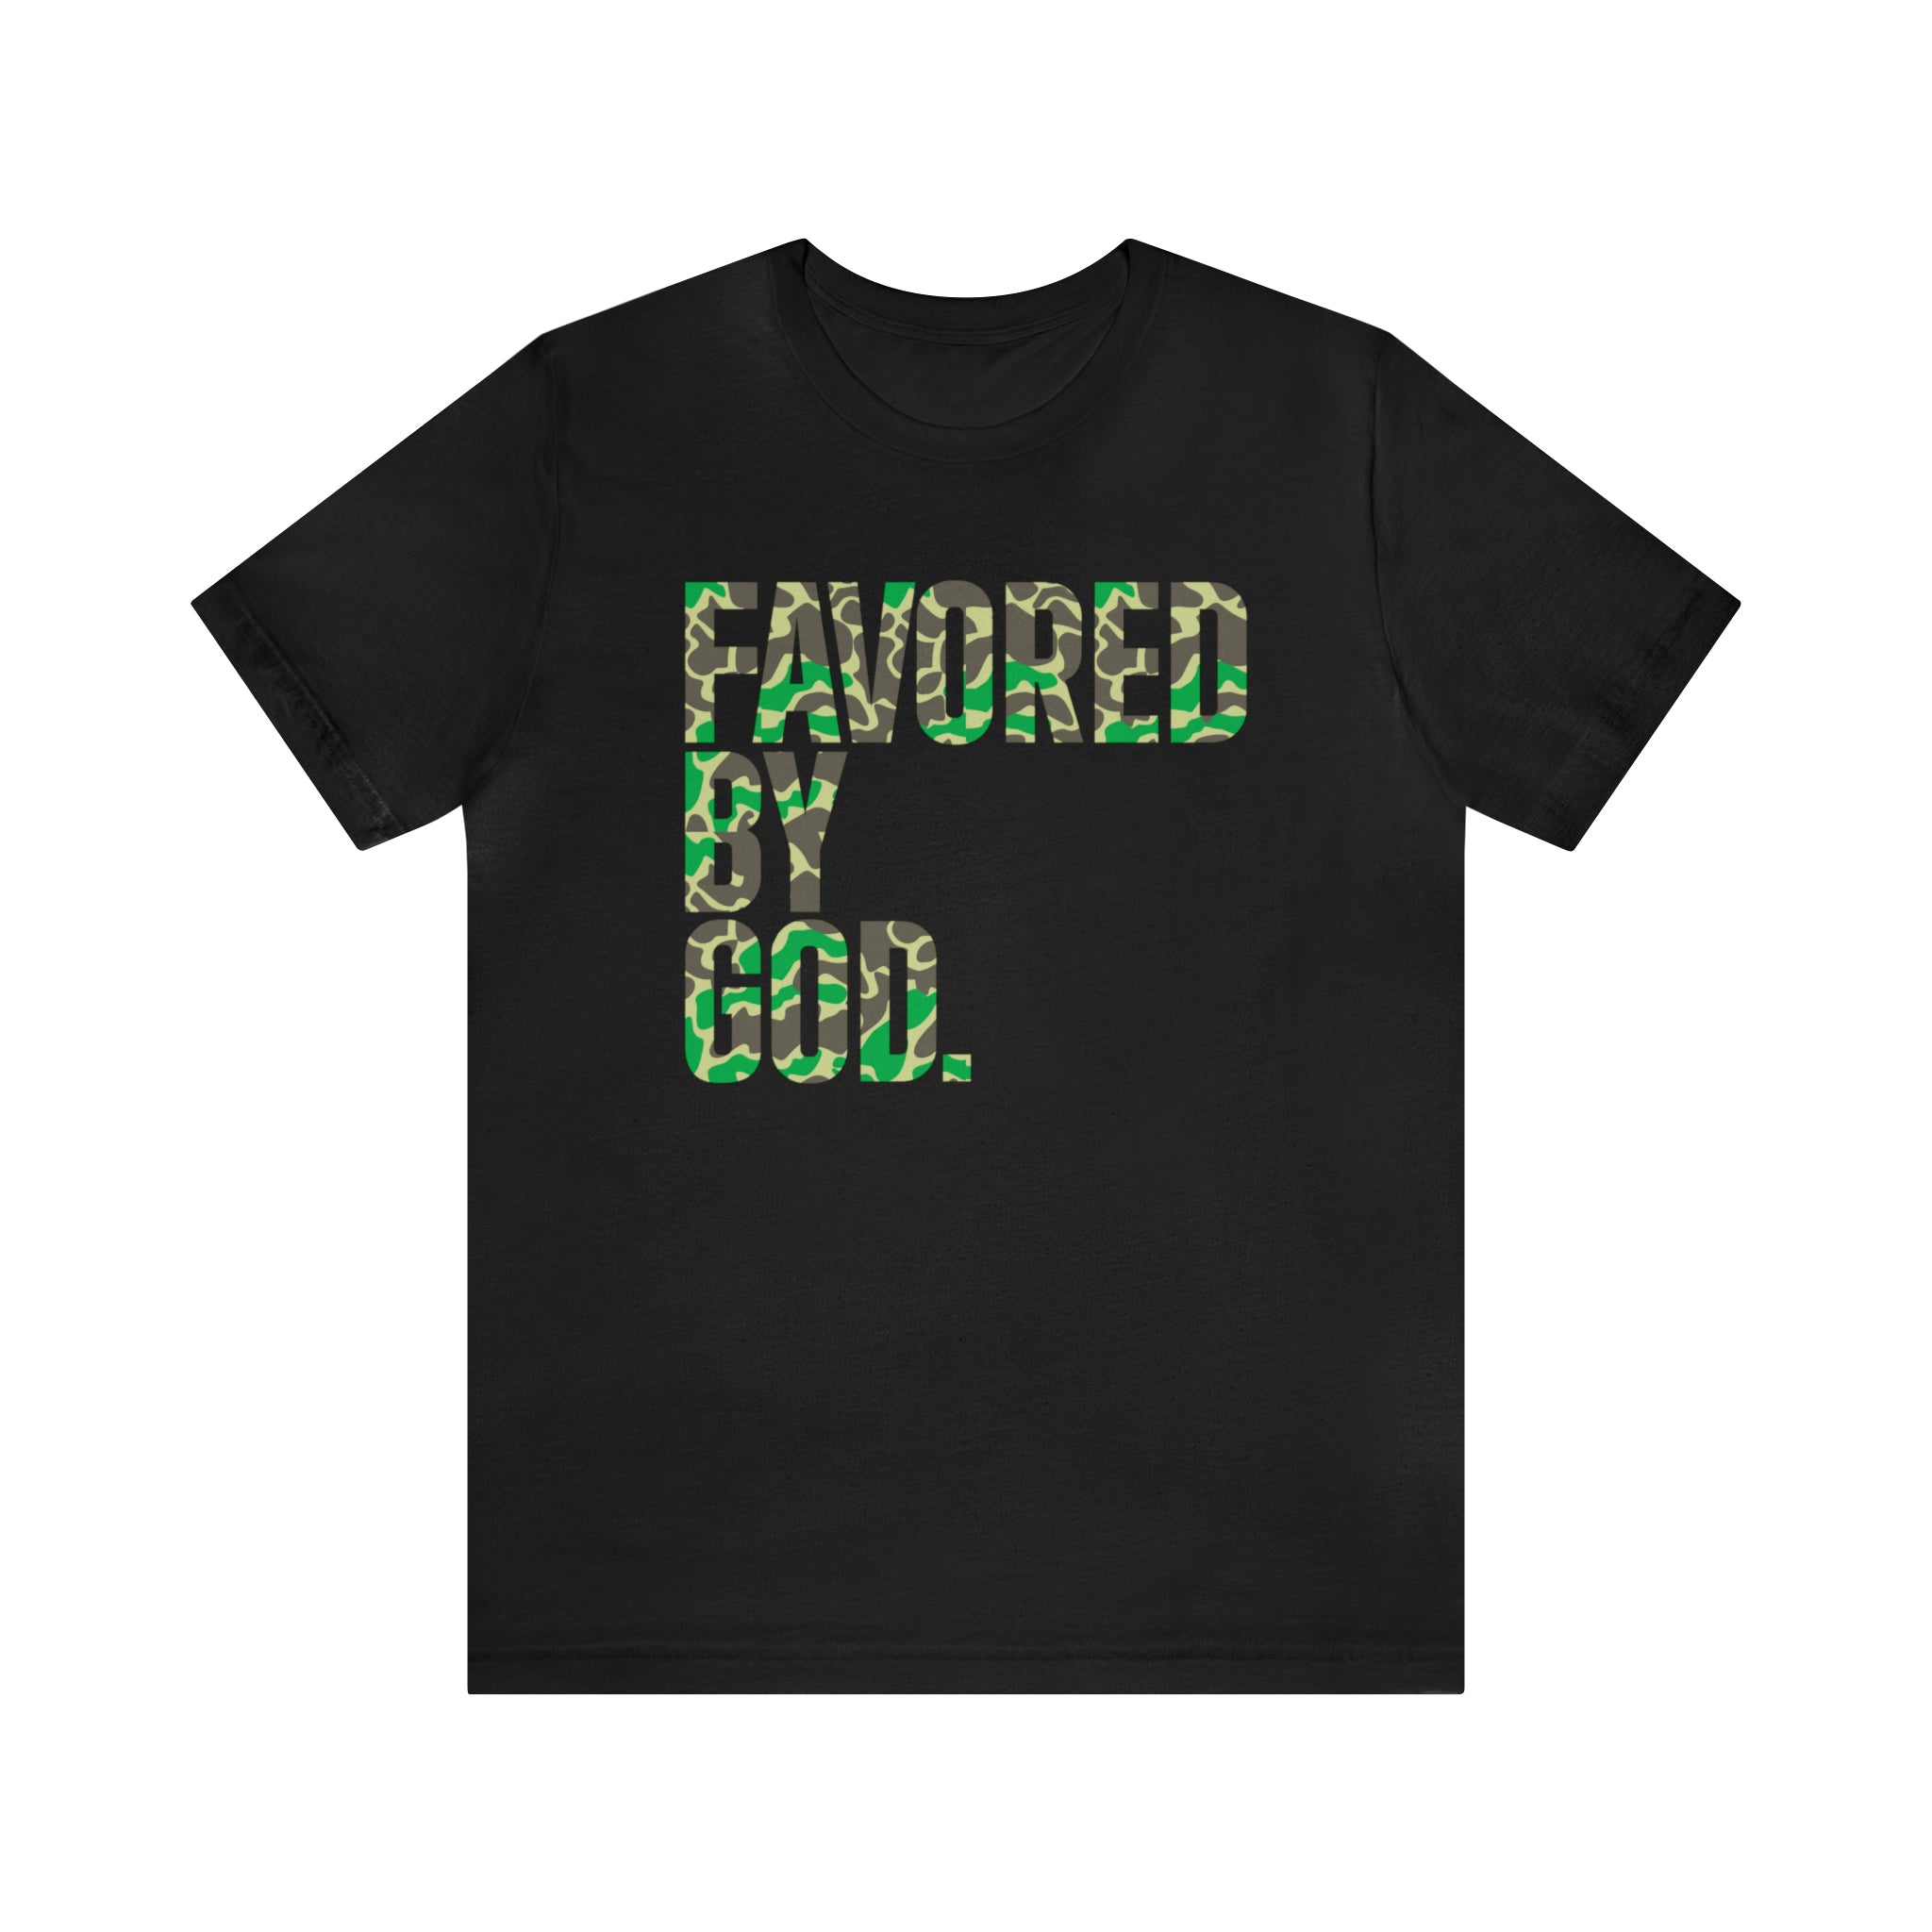 Favored By God Camo Tee, Used By God, Used By God Clothing, Christian Apparel, Christian T-Shirts, Christian Shirts, christian t shirts for women, Men's Christian T-Shirt, Christian Clothing, God Shirts, christian clothing t shirts, Christian Sweatshirts, womens christian t shirts, t-shirts about jesus, God Clothing, Jesus Hoodie, Jesus Clothes, God Is Dope, Art Of Homage, Red Letter Clothing, Elevated Faith, Beacon Threads, God The Father Apparel